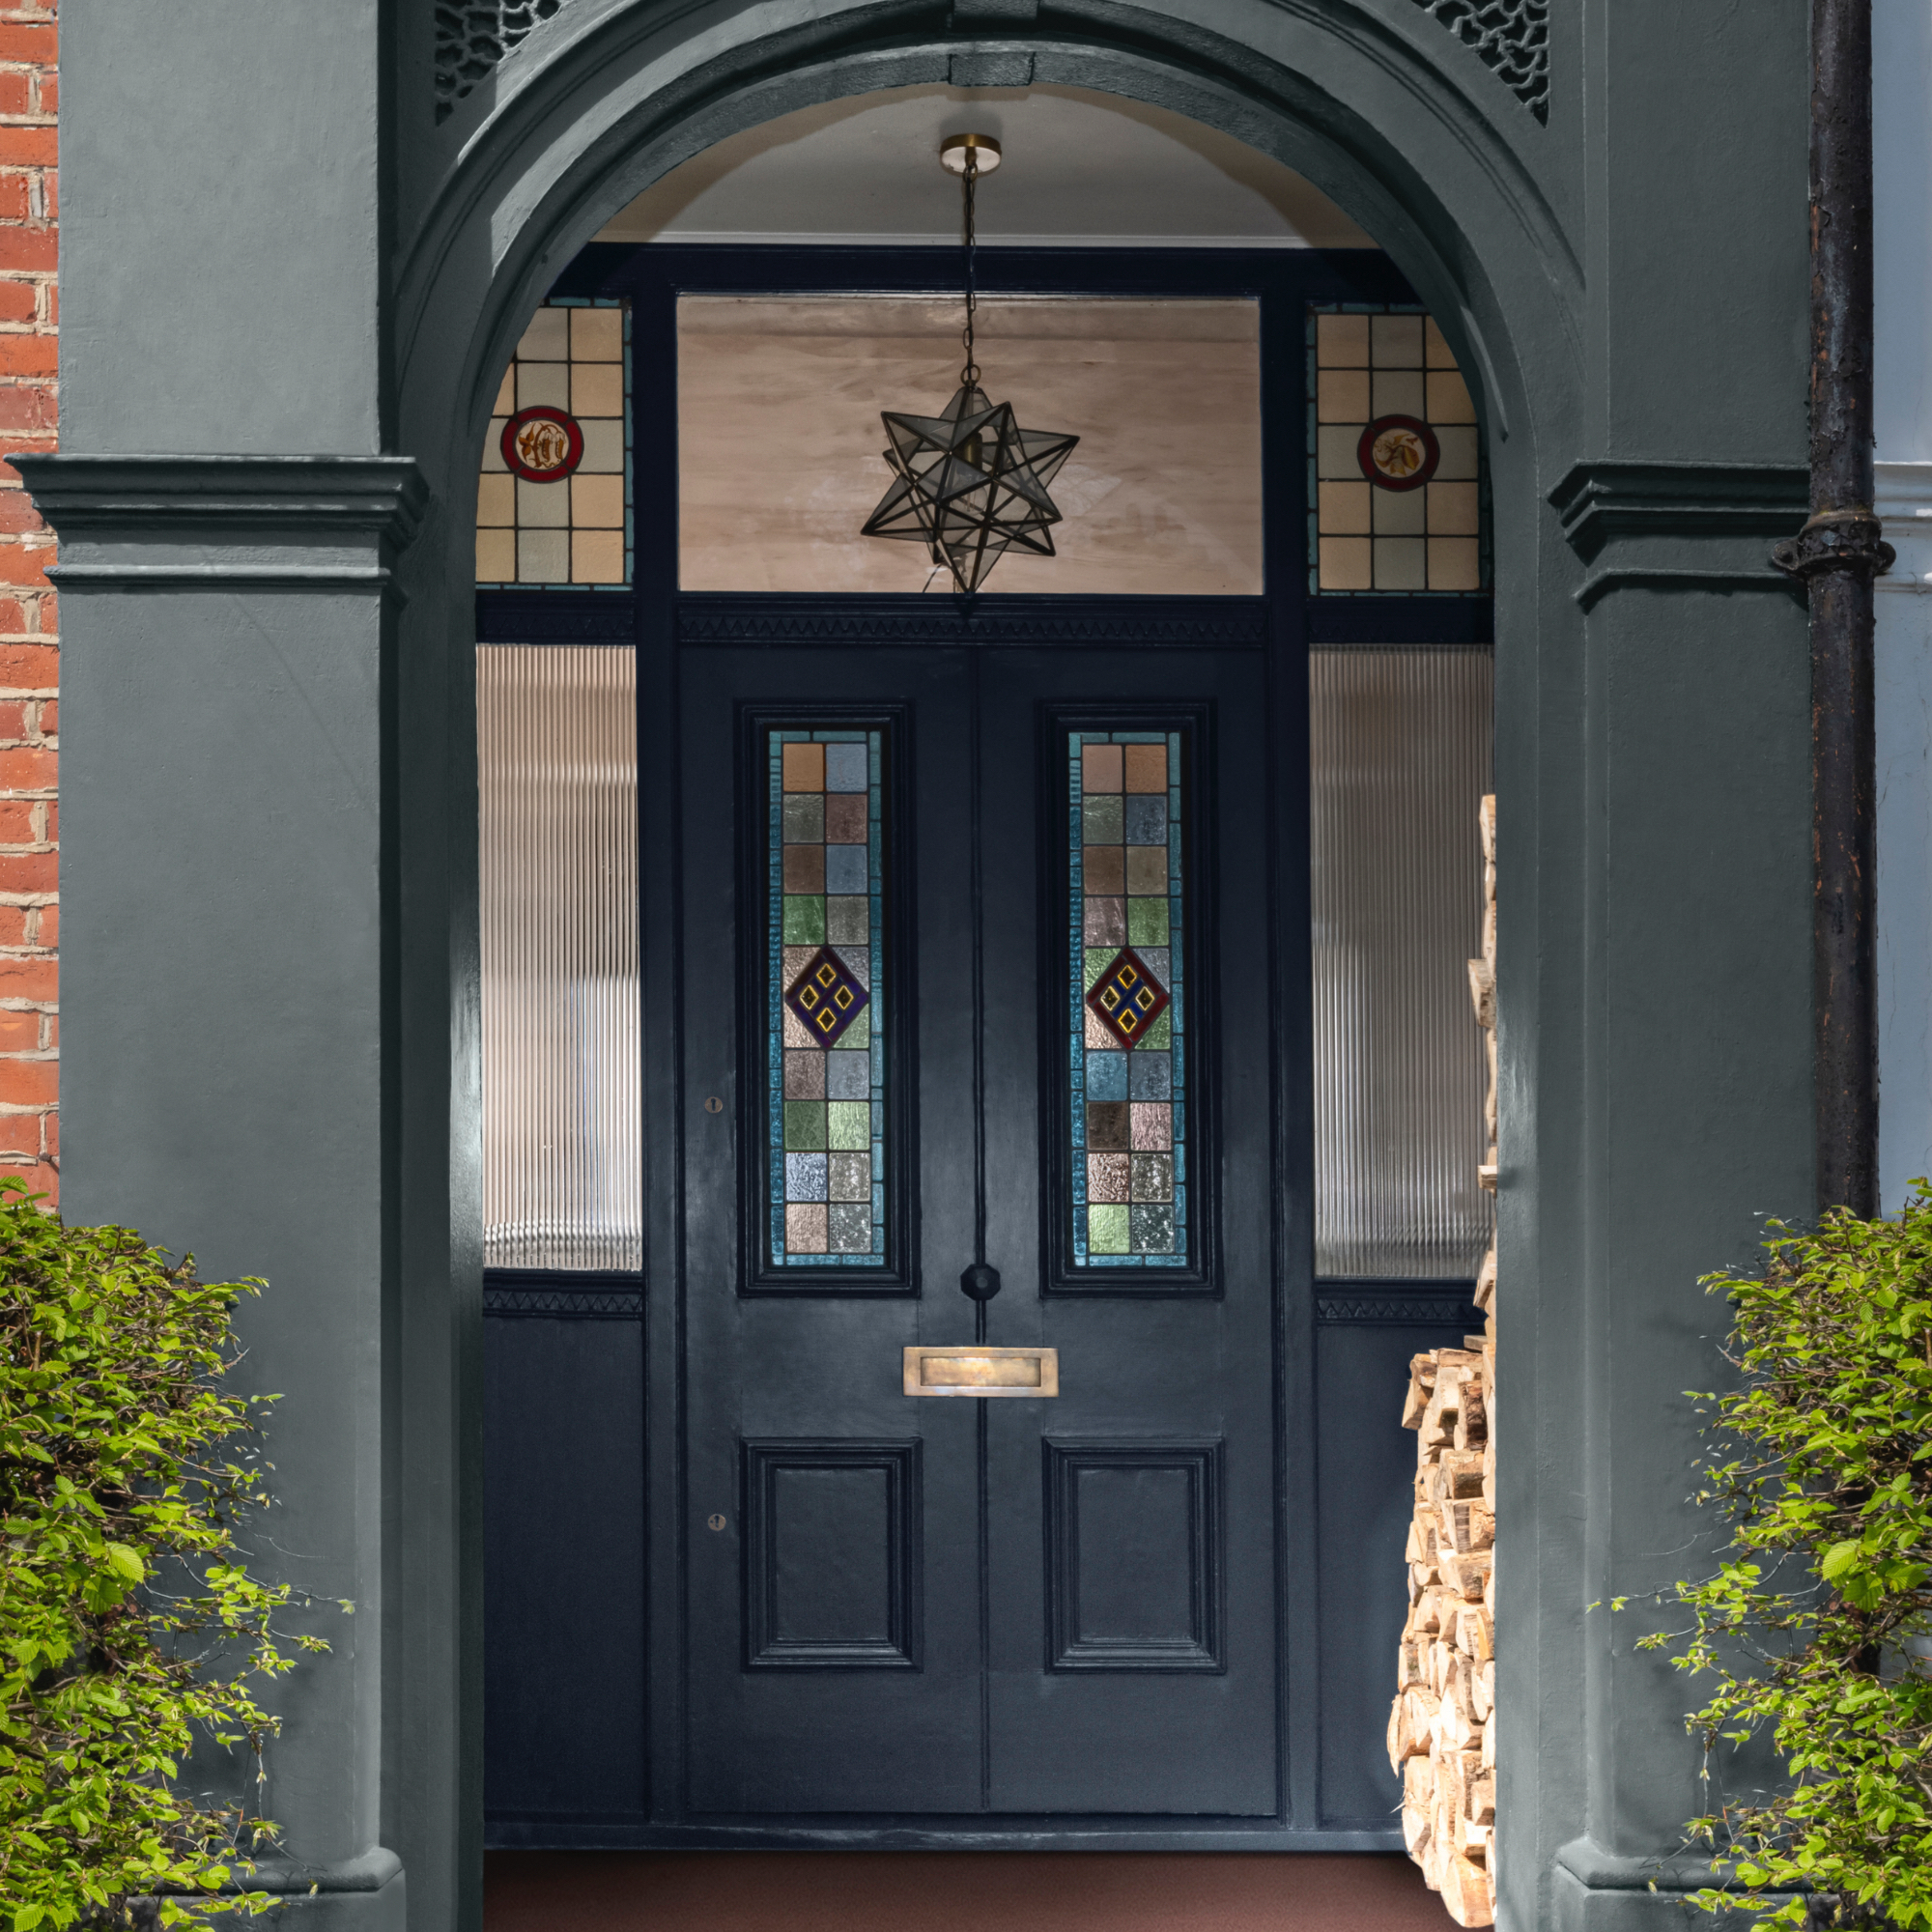 Dark blue front door with stained glass, pendant star light, dark grey painted masonry